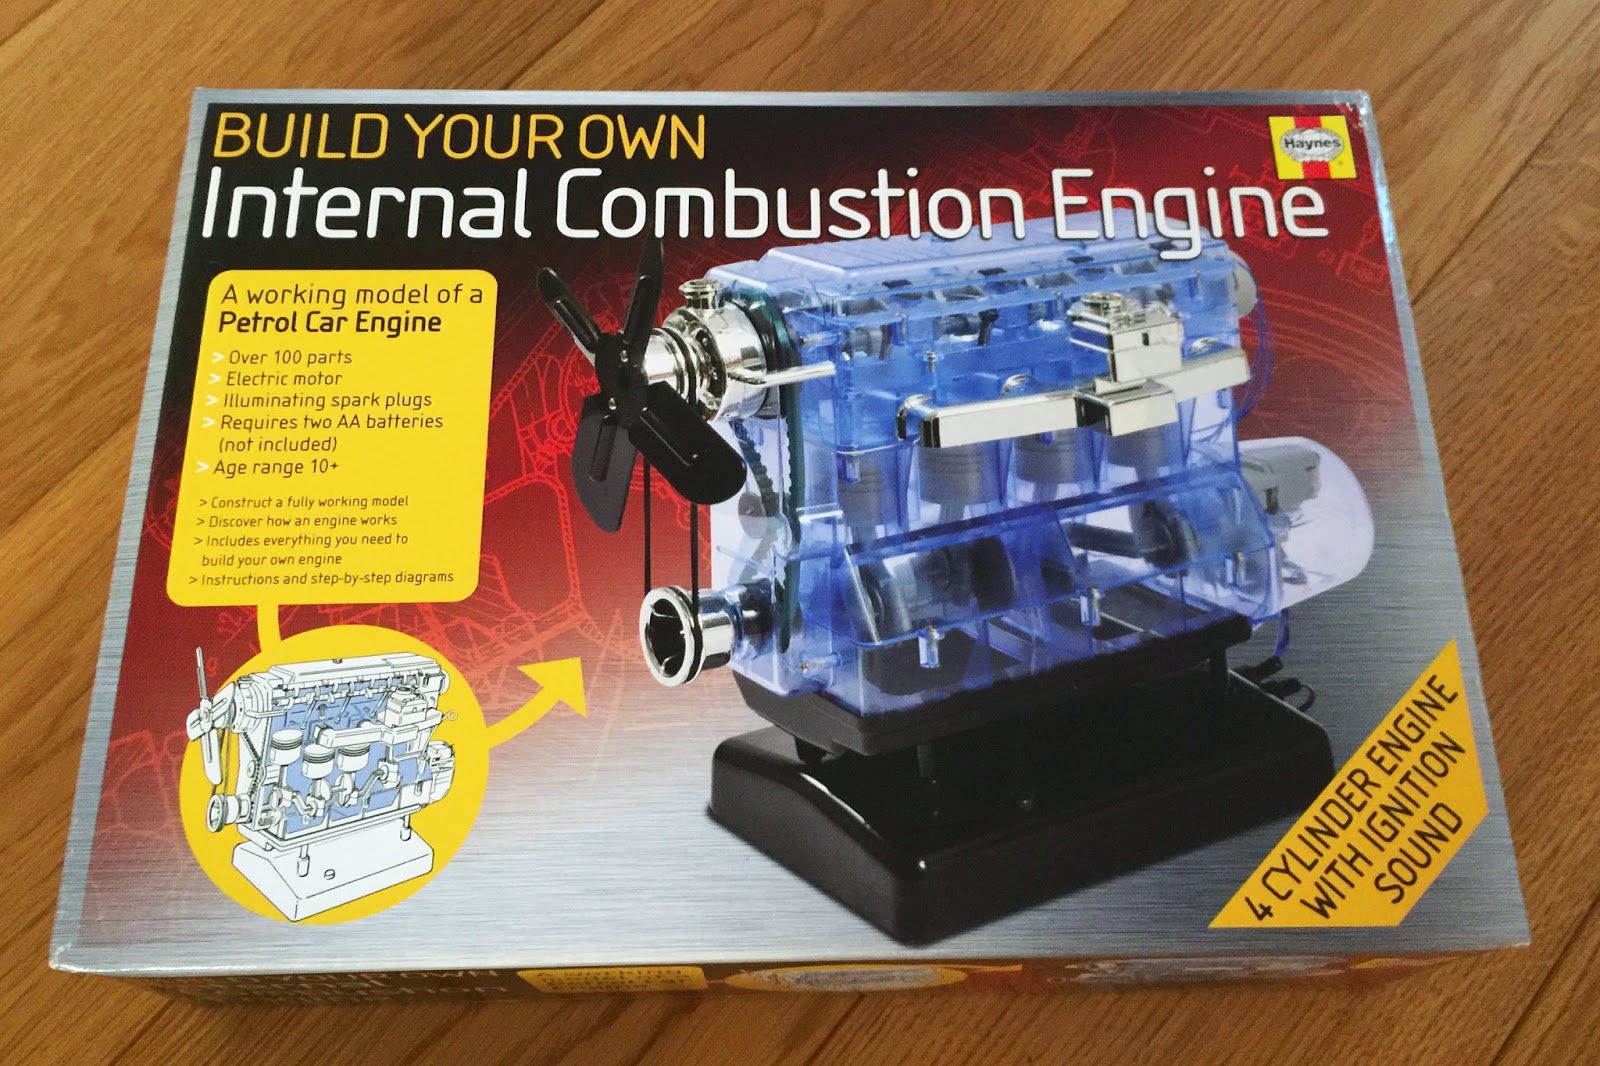 Build Your Own Internal Combustion Engine made by Haynes